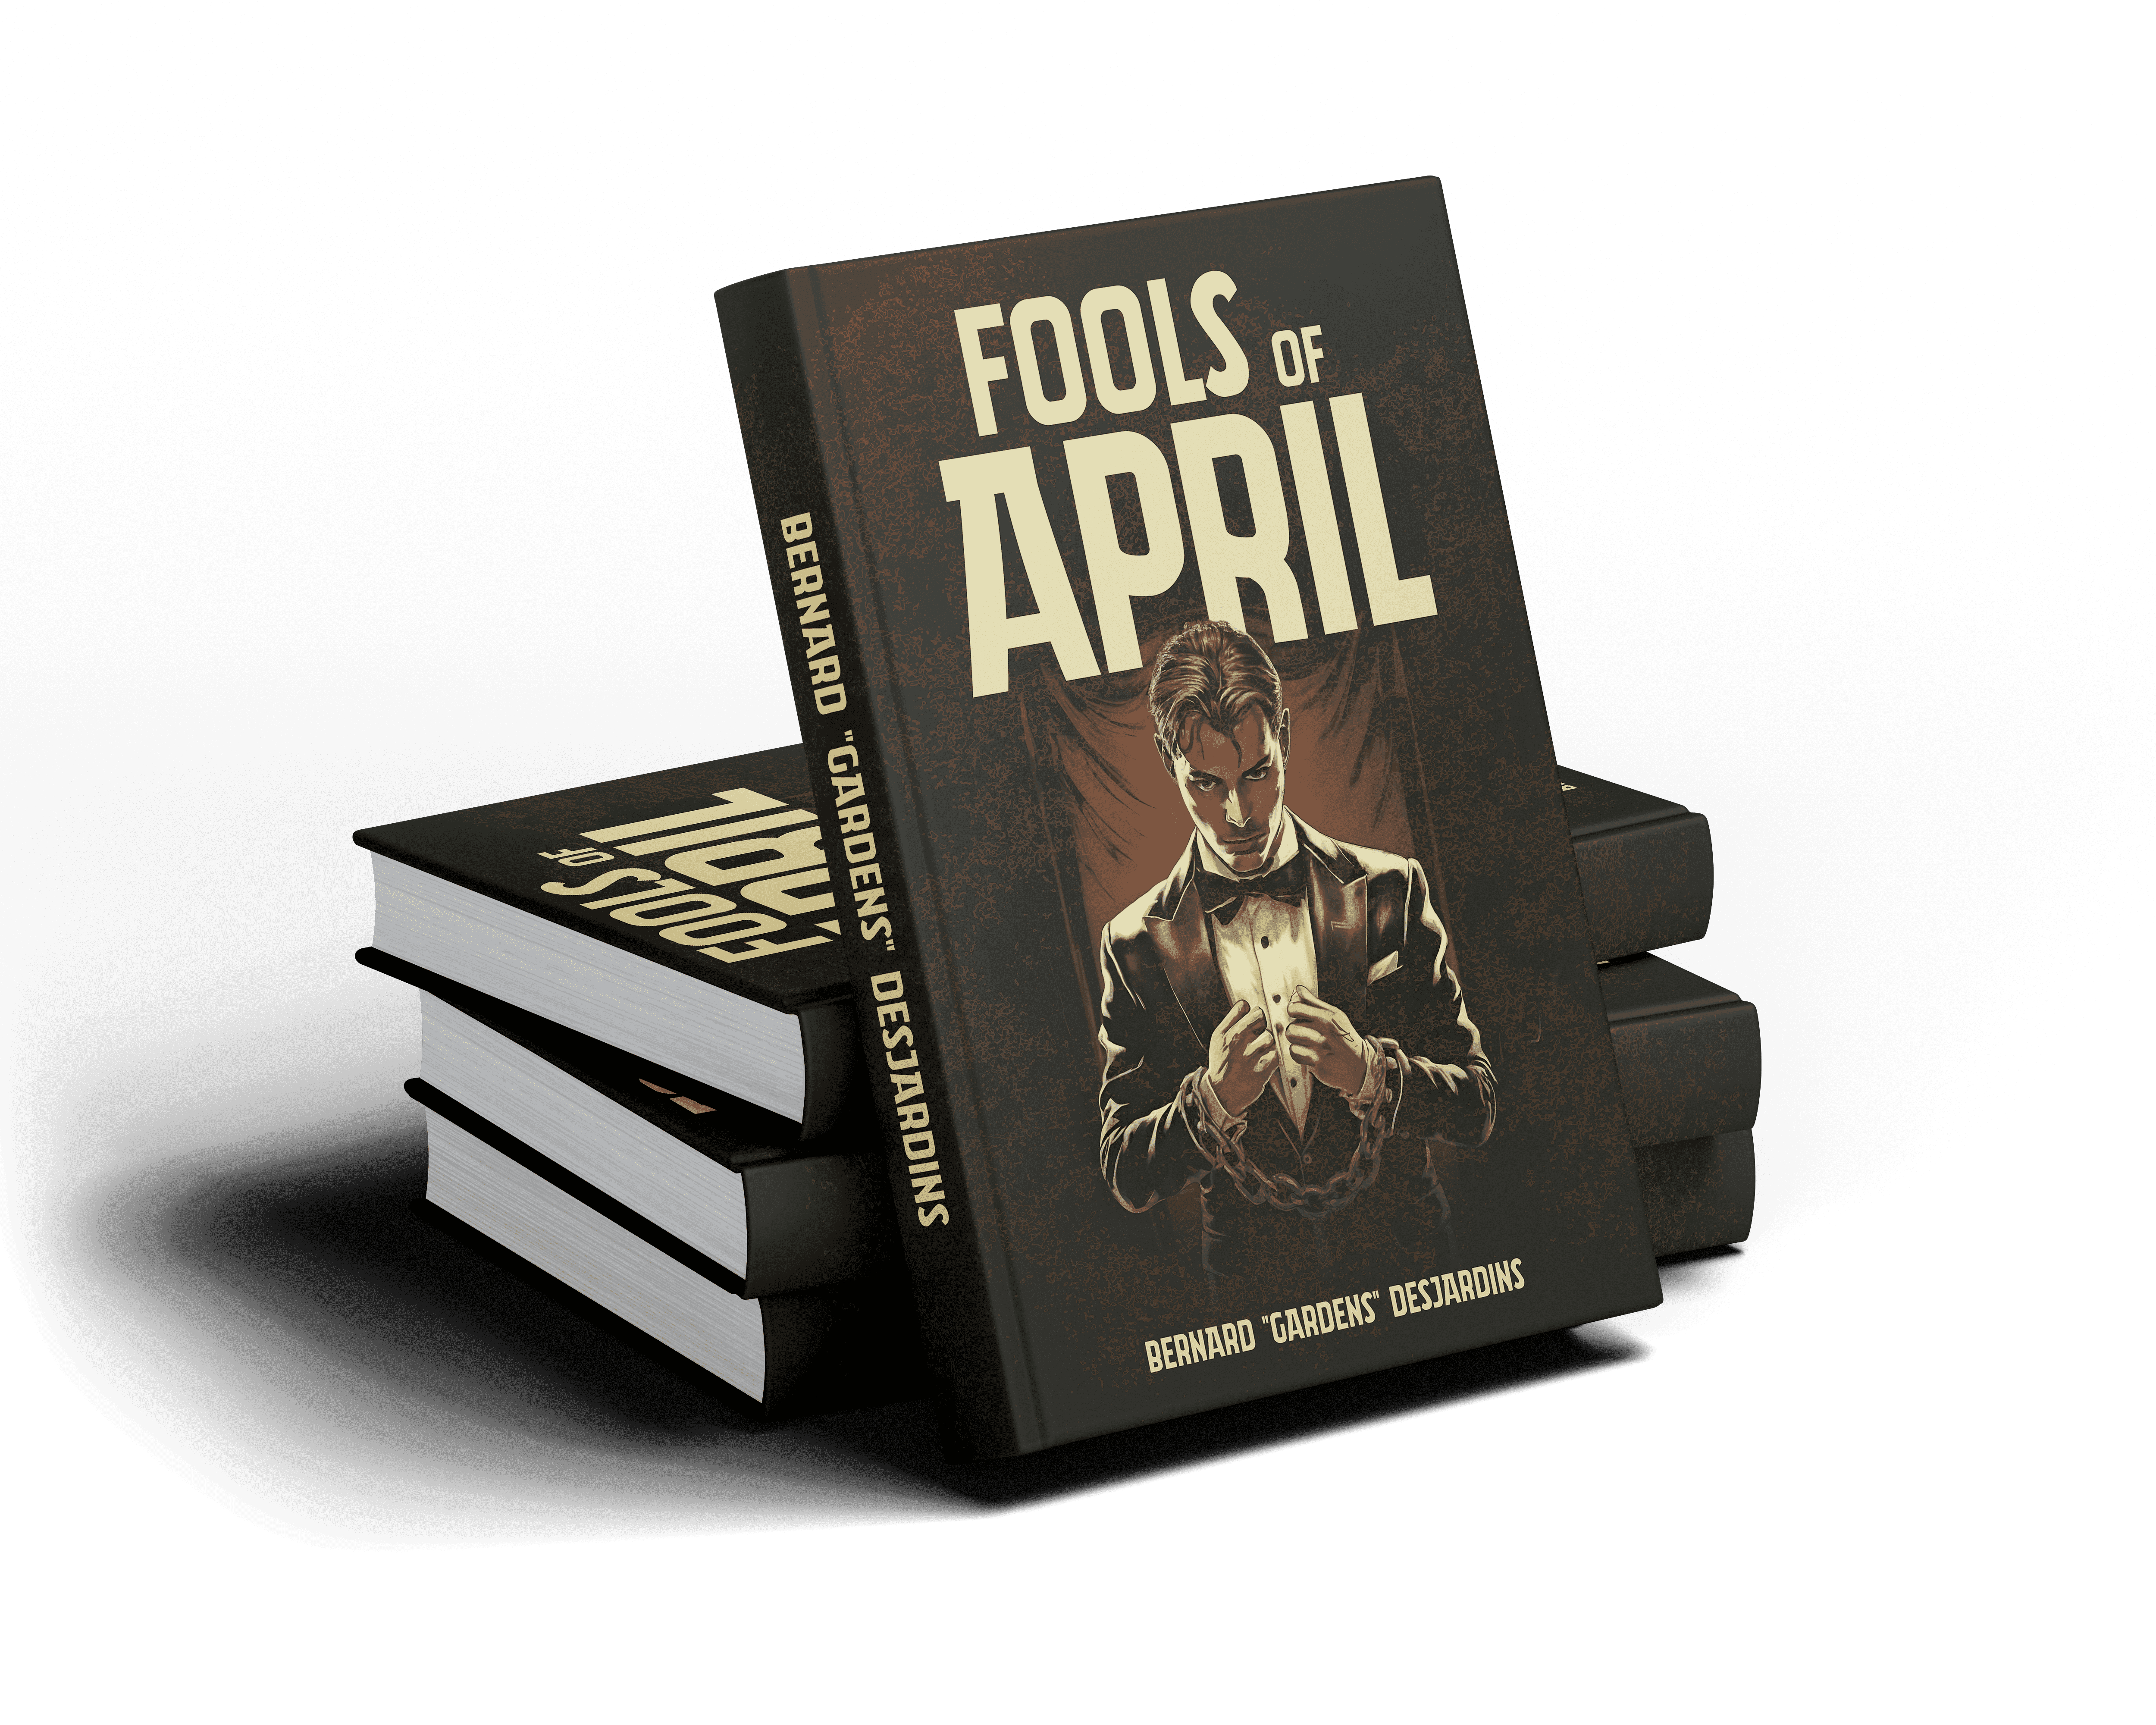 Fools of April by Jason Kern: A whimsical artwork depicting playful and mischievous characters celebrating April Fools Day.